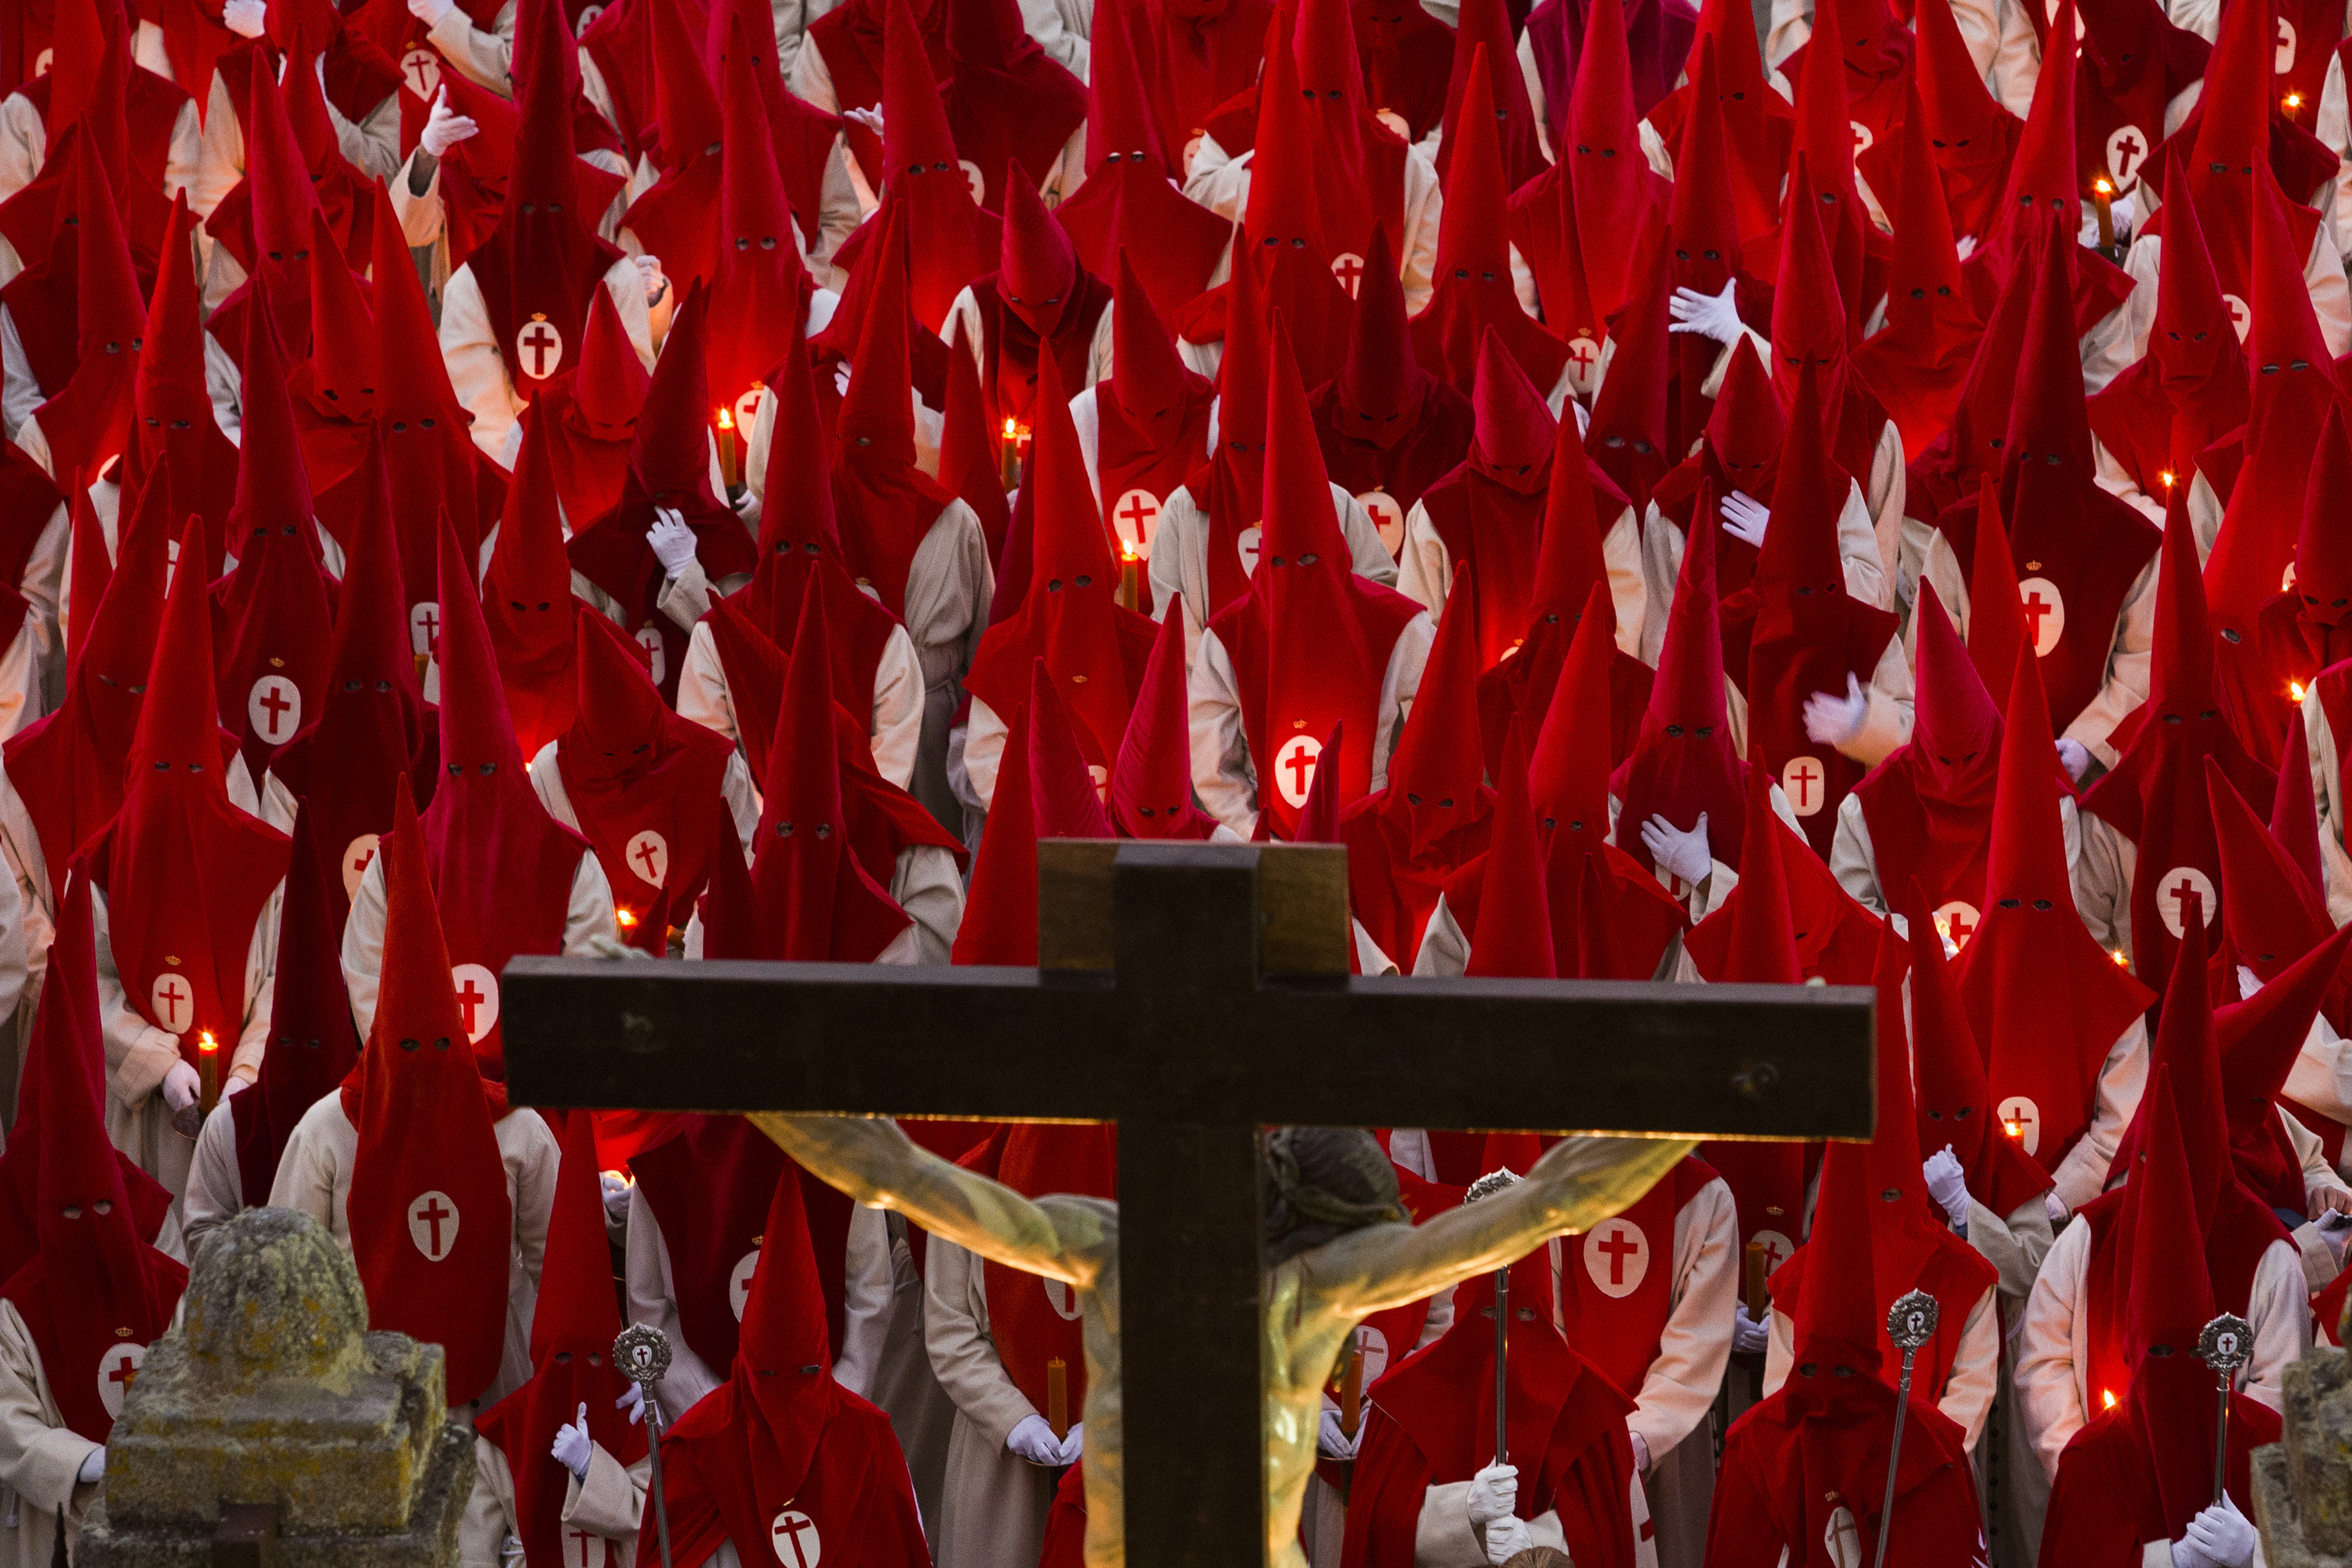 Penitents take part in Spain’s Silent Procession tradition during Holy Week. Photo: AFP